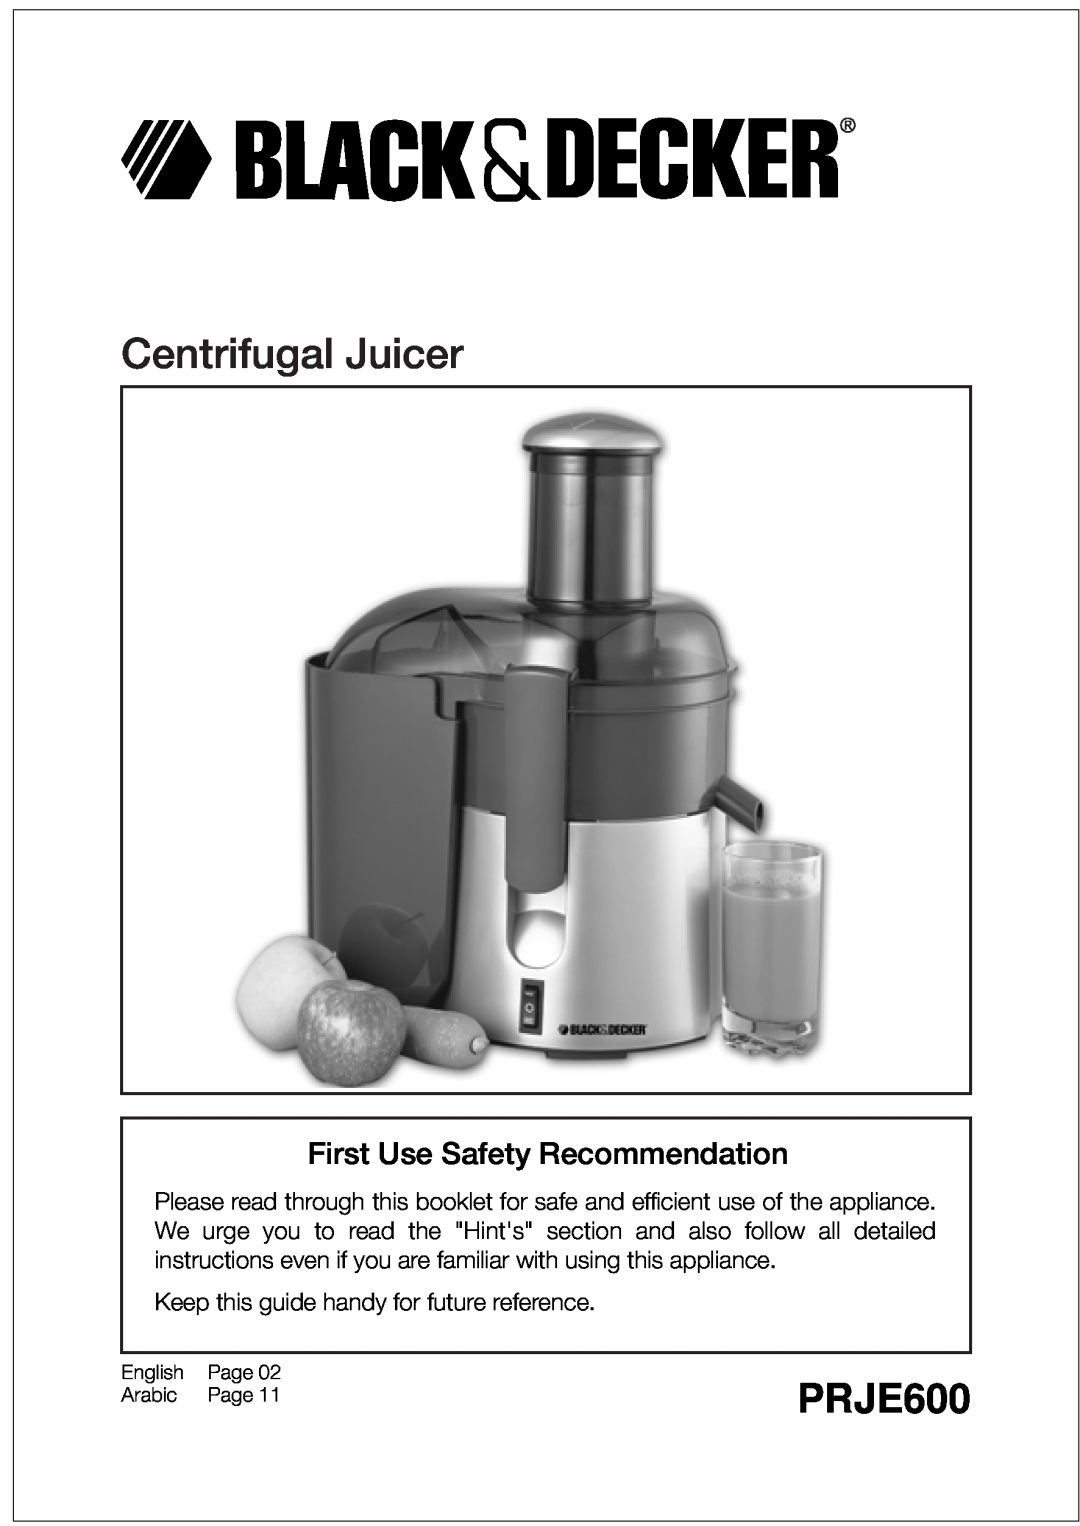 Black & Decker PRJE600 manual Centrifugal Juicer, First Use Safety Recommendation, English, Page, Arabic 